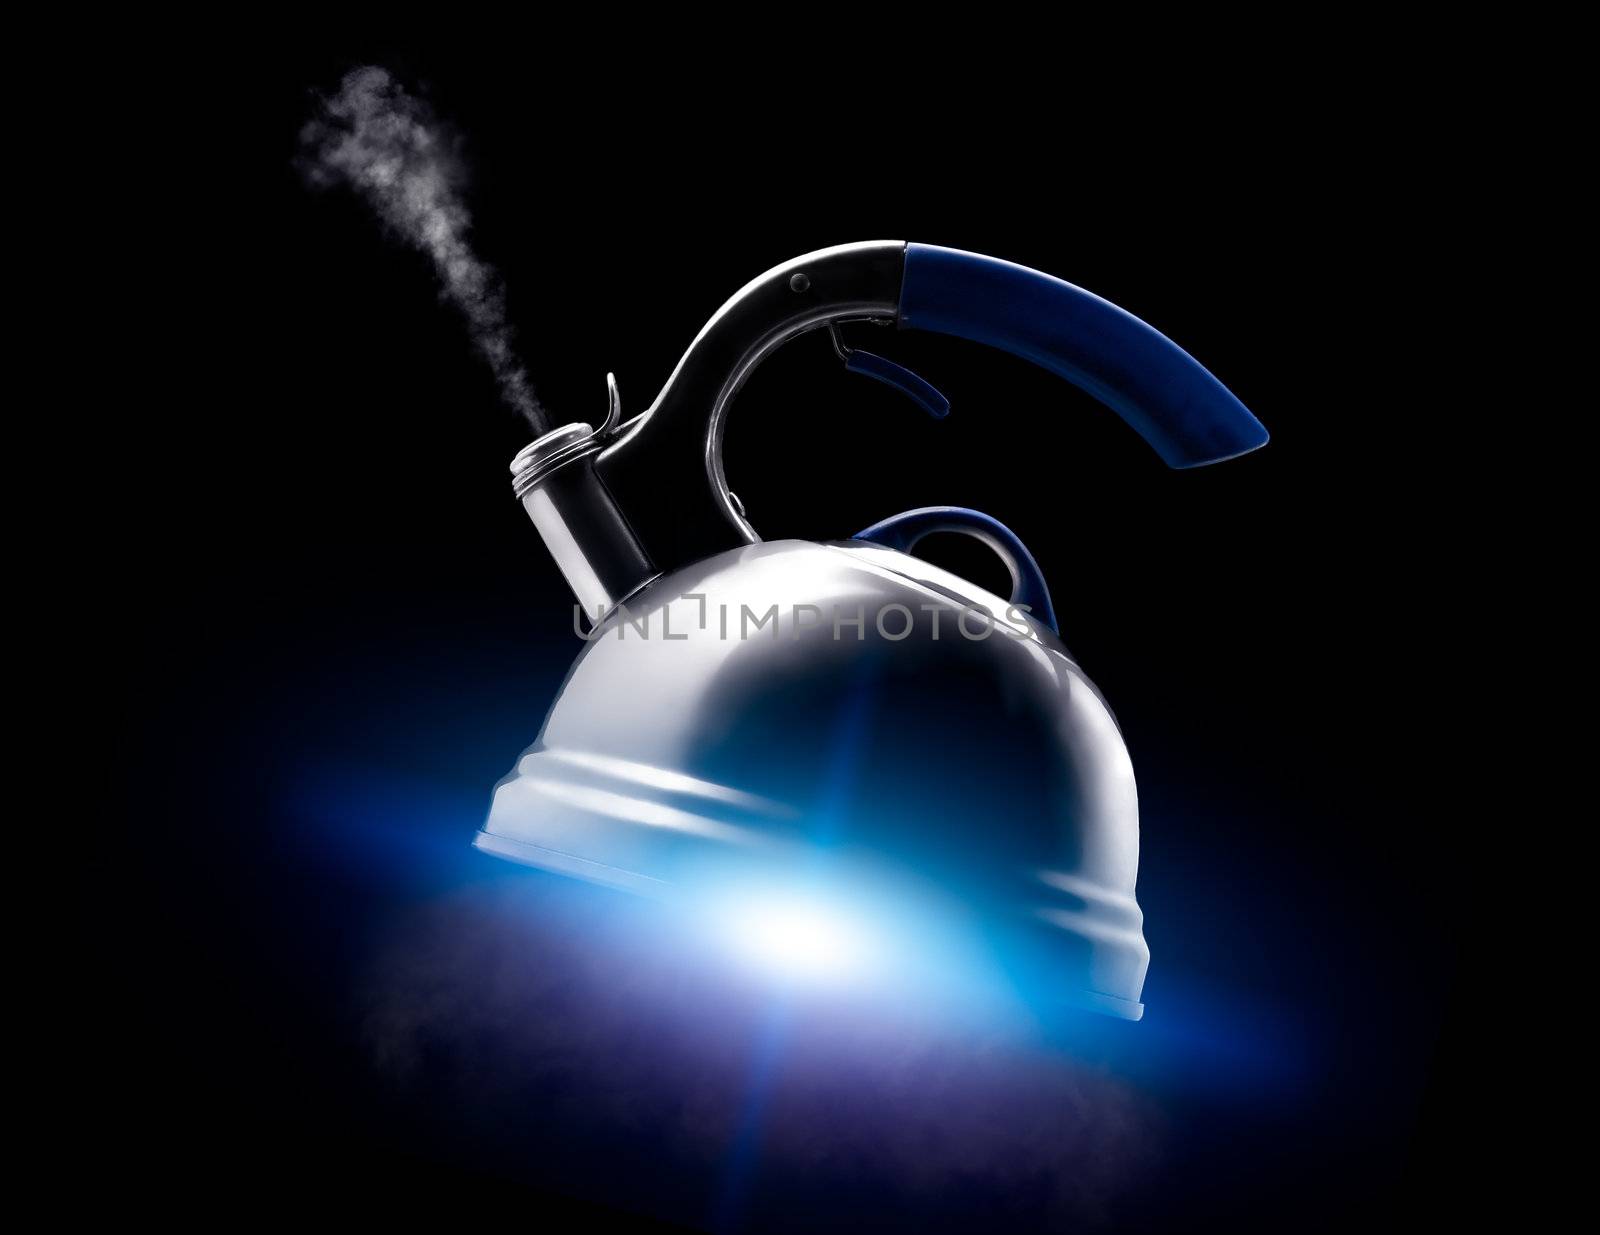 Tea kettle with boiling water on black background.  by kirs-ua